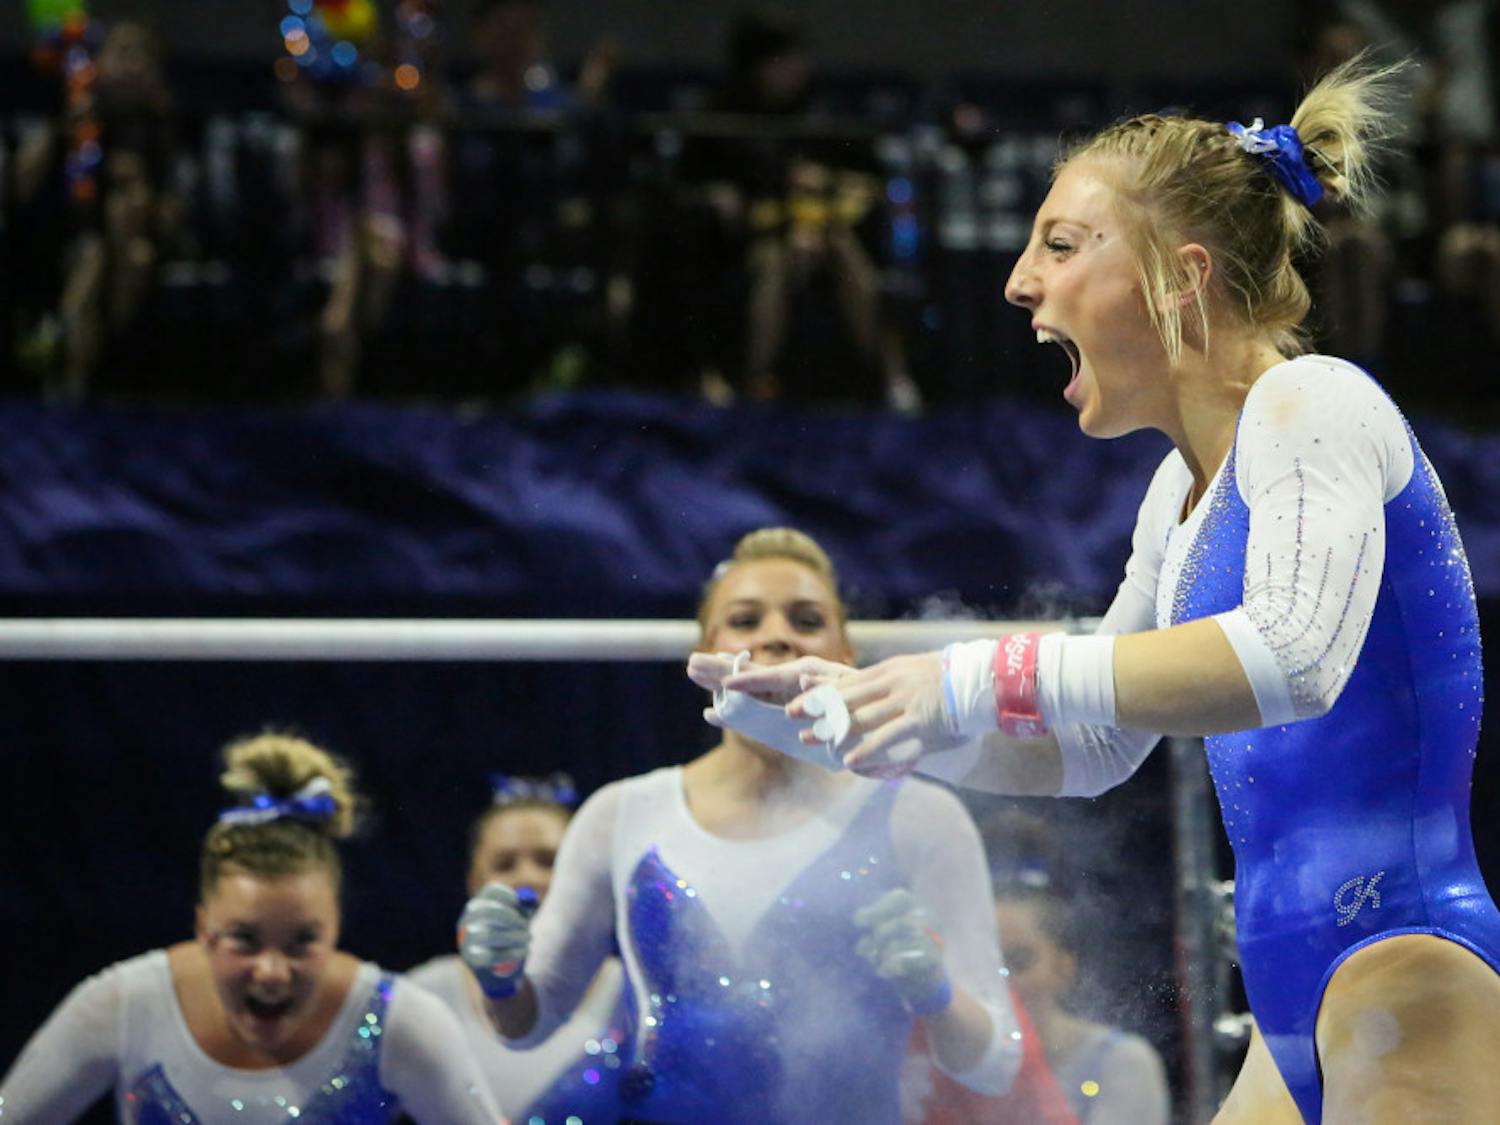 Senior Alex McMurtry took the individual title in the All Around (39.725) in Florida's win at the NCAA Regional Championship in University Park, Pennsylvania. 